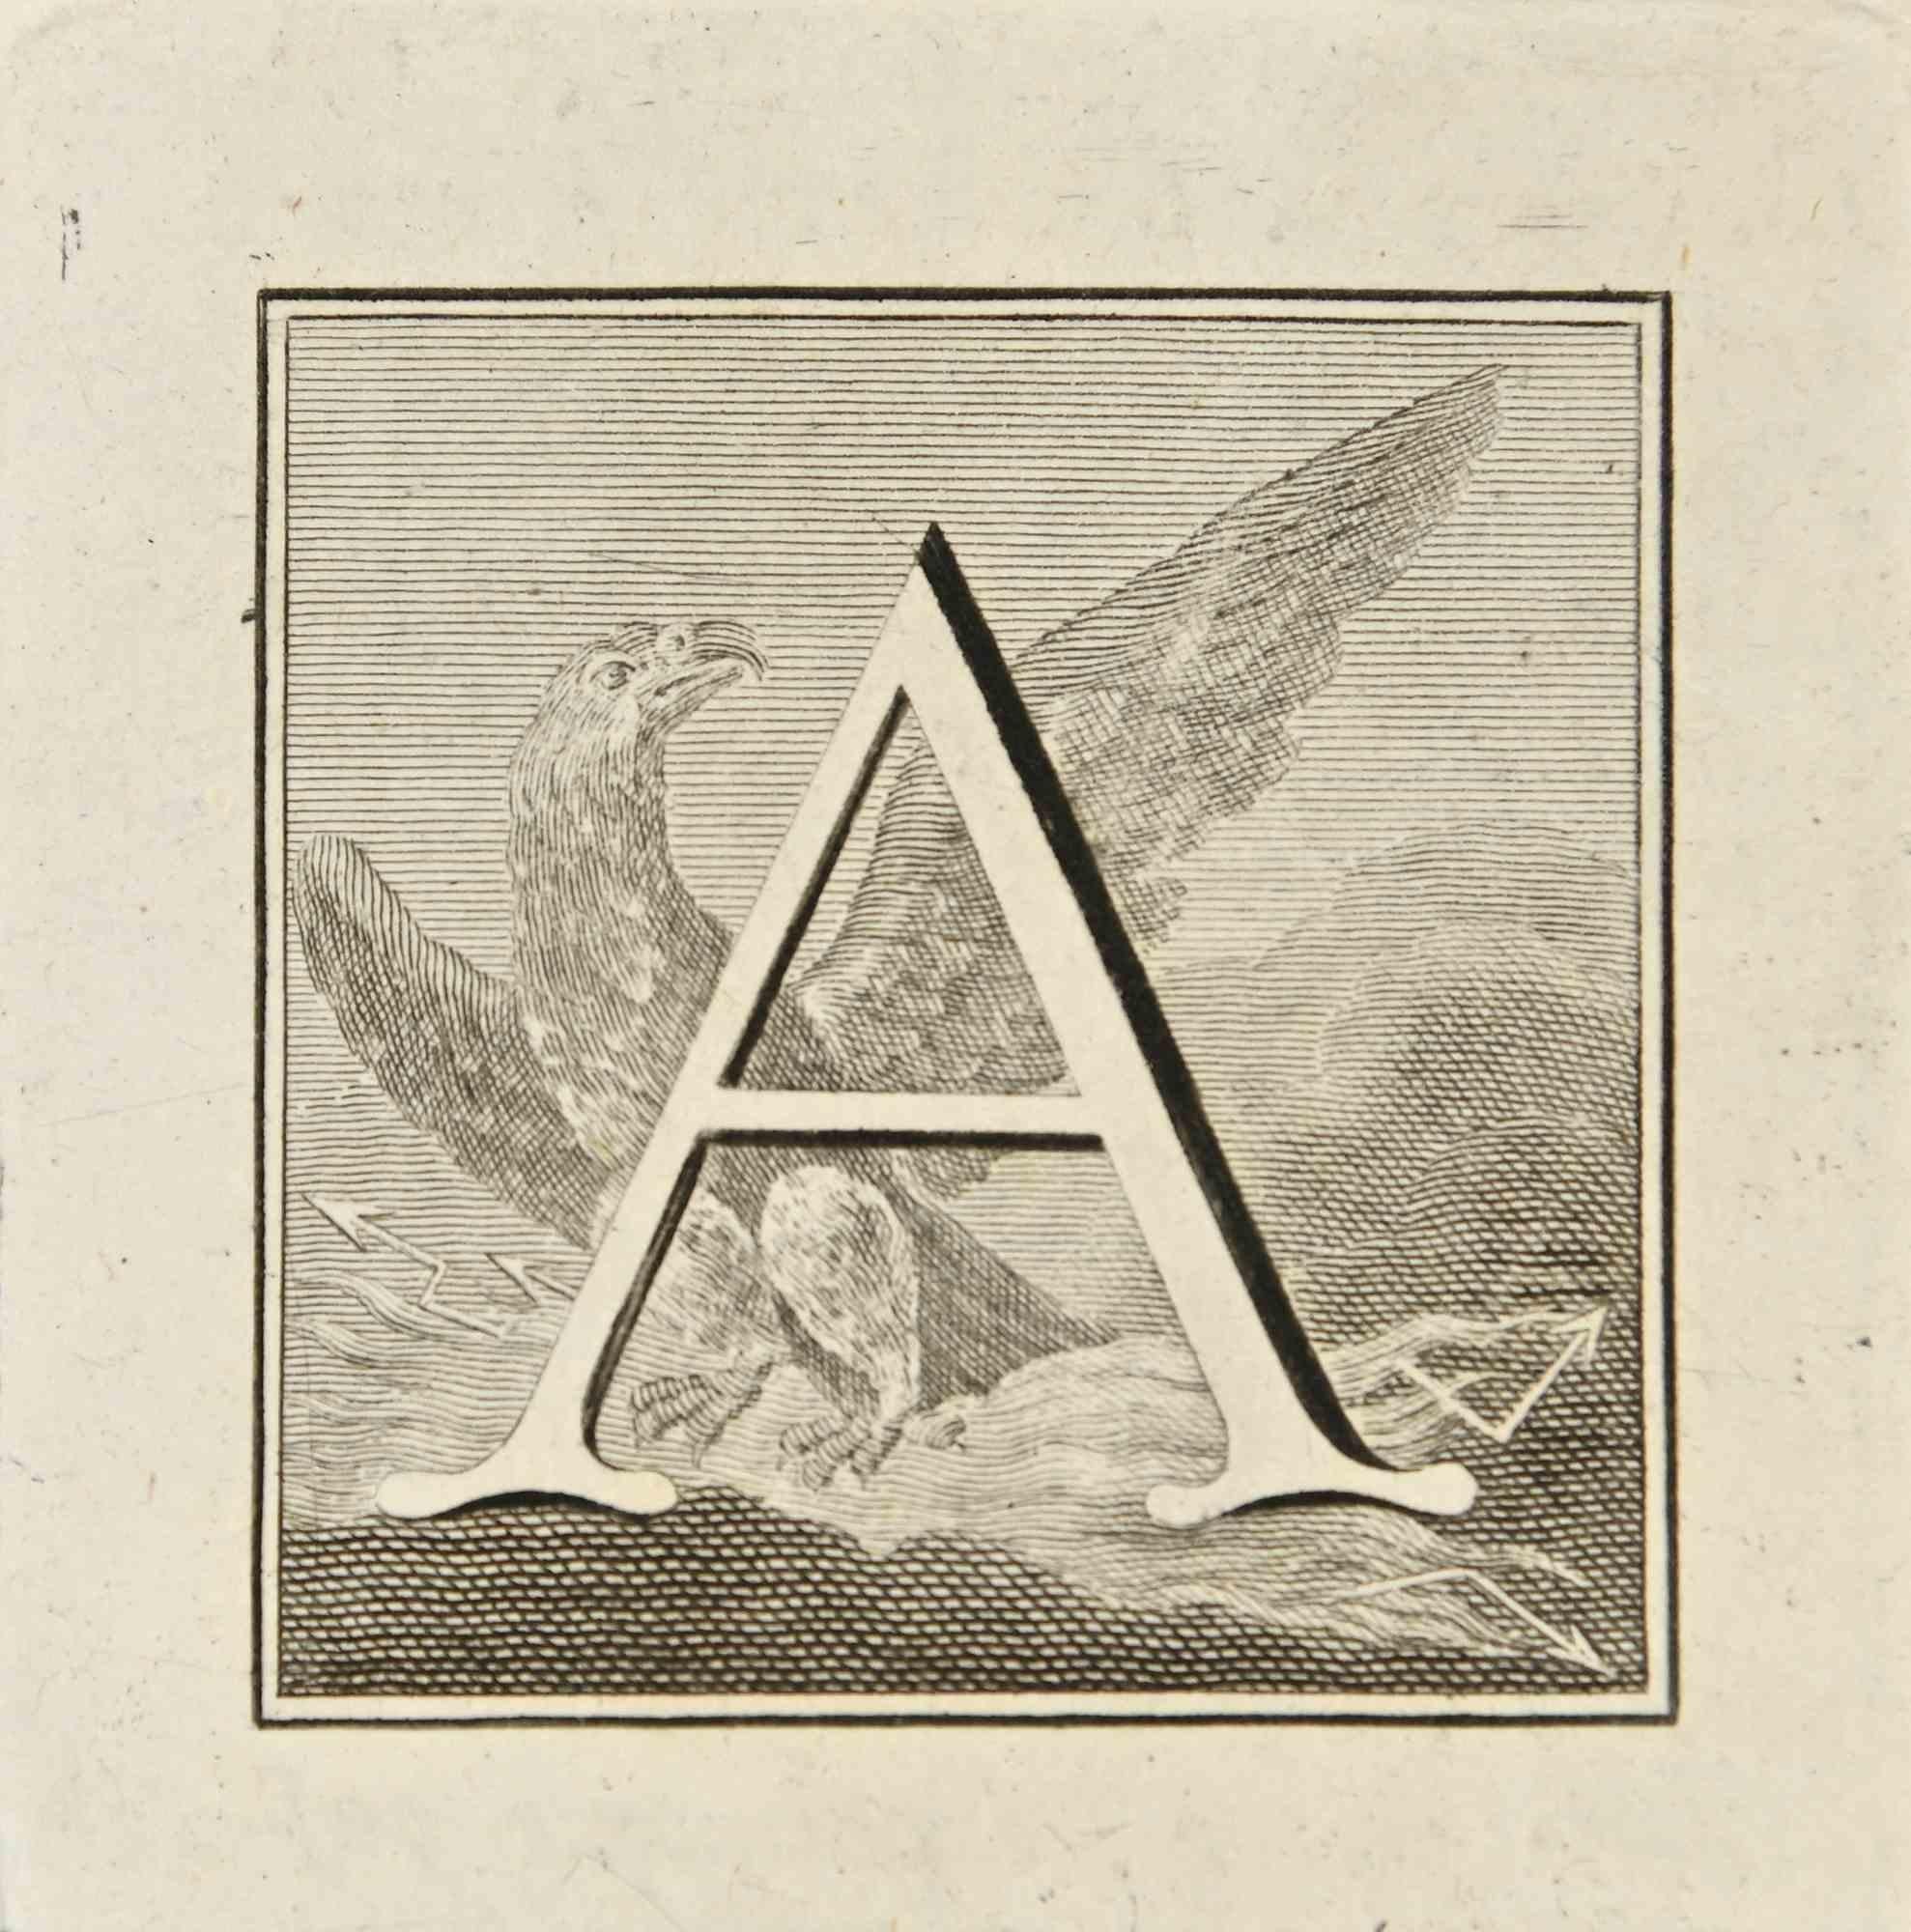 Letter of the Alphabet A,  from the series "Antiquities of Herculaneum", is an etching on paper realized by Luigi Vanvitelli in the 18th century.

Good conditions.

The etching belongs to the print suite “Antiquities of Herculaneum Exposed”